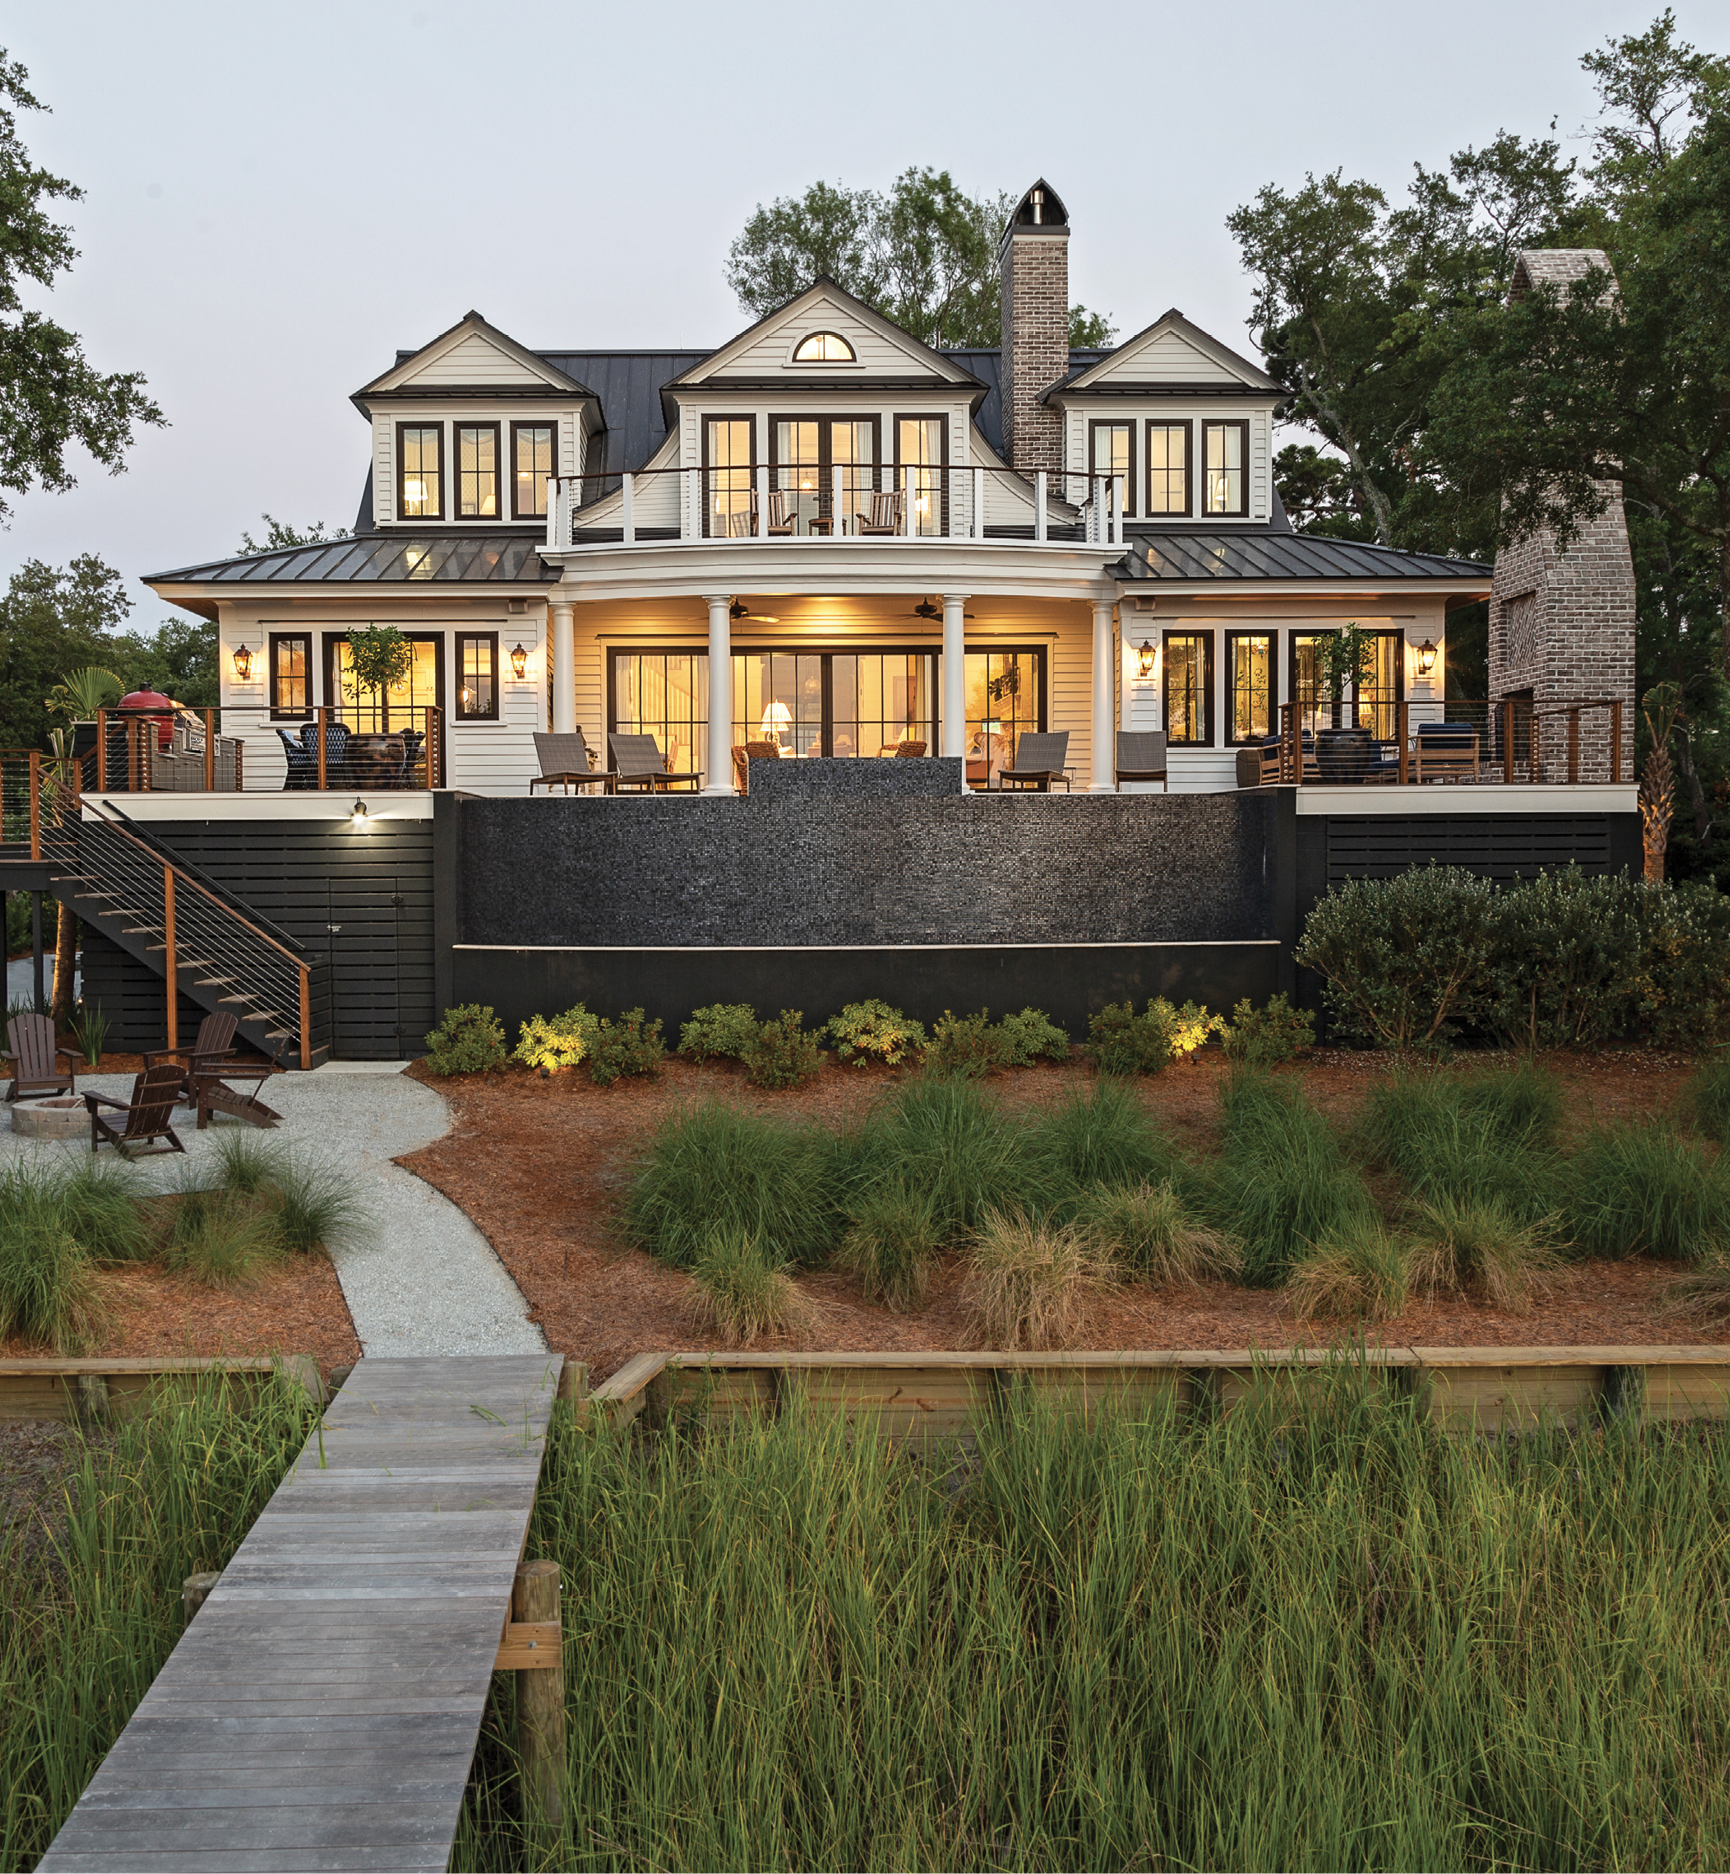 WHAT DREAMS ARE MADE OF: Martha Nagle-Halvorson wanted to build her dream home as a replica of the classic Lowcountry houses she grew up surrounded by during her childhood. “I didn’t want anything over-the-top or too big,” she says. The result is a beautiful, 3,400-square-foot home that perfectly marries traditional architecture with modern outdoor living, while taking in quite possibly the best views in all of Charleston.